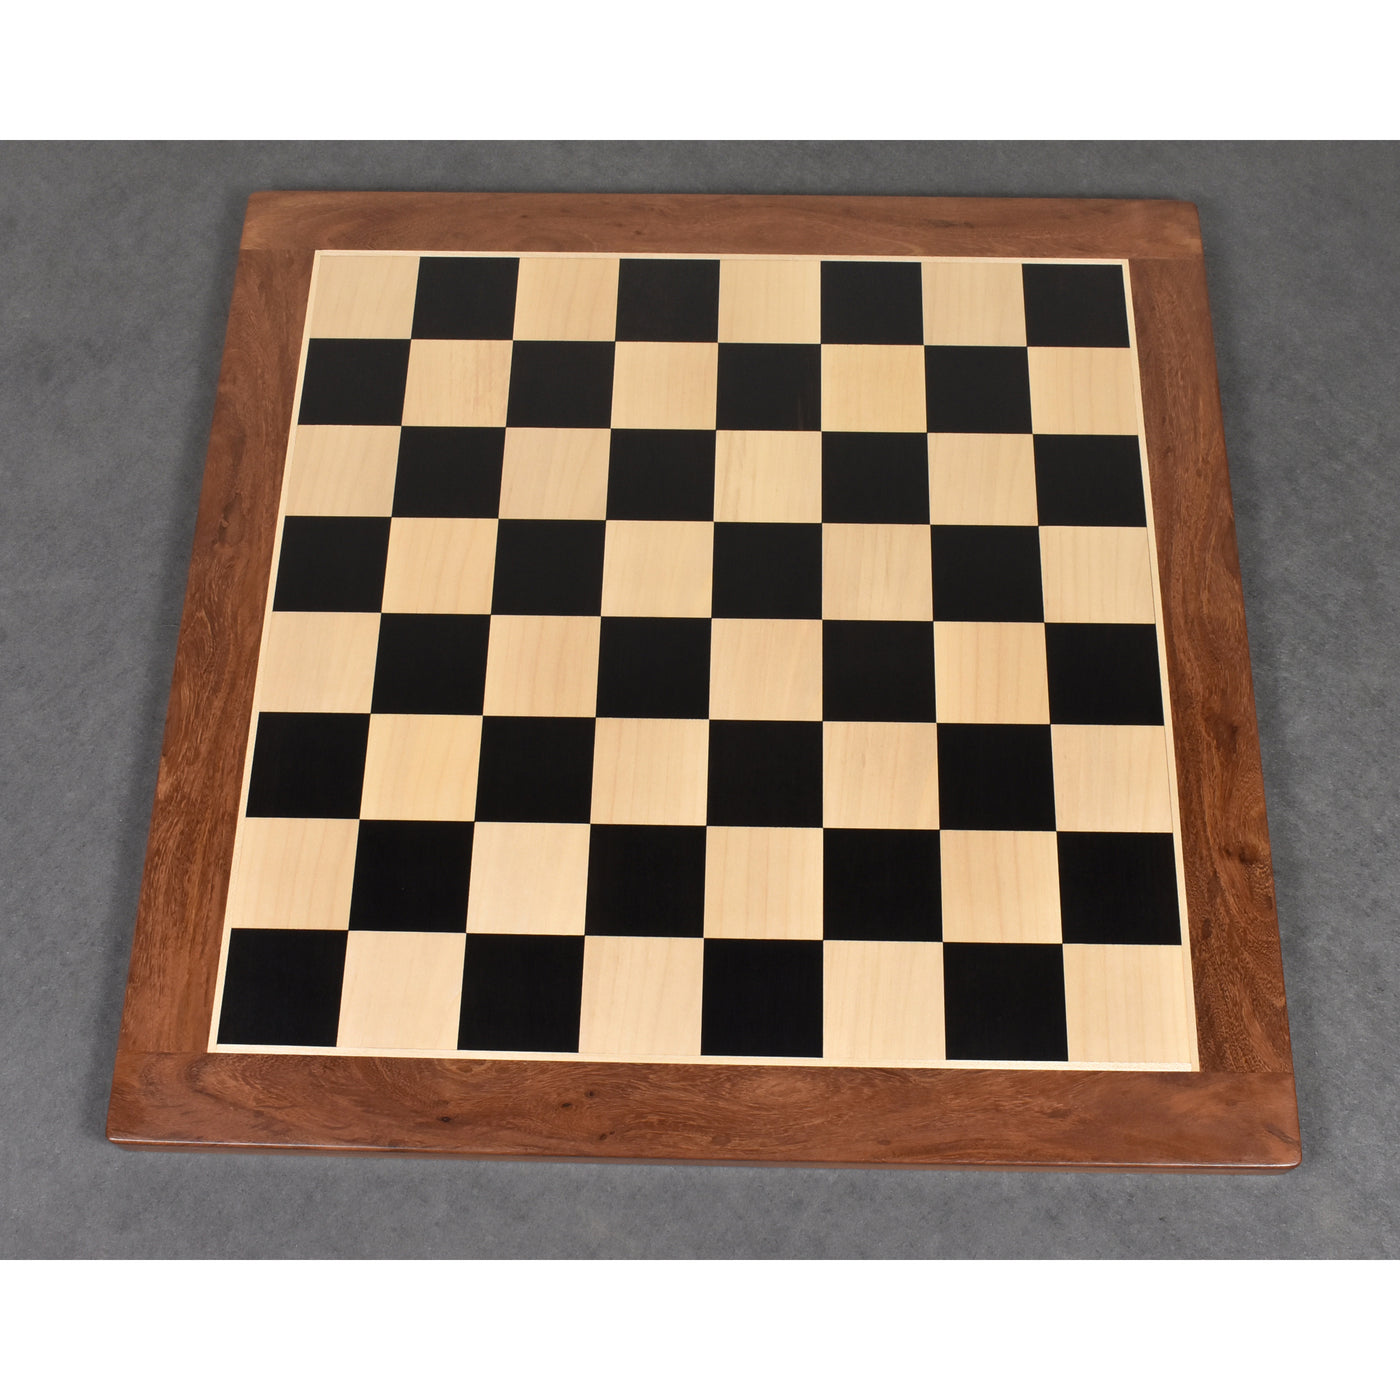 Combo of Luxury Augustus Staunton Chess Set - Pieces in Ebony Wood with Chessboard and Storage Box